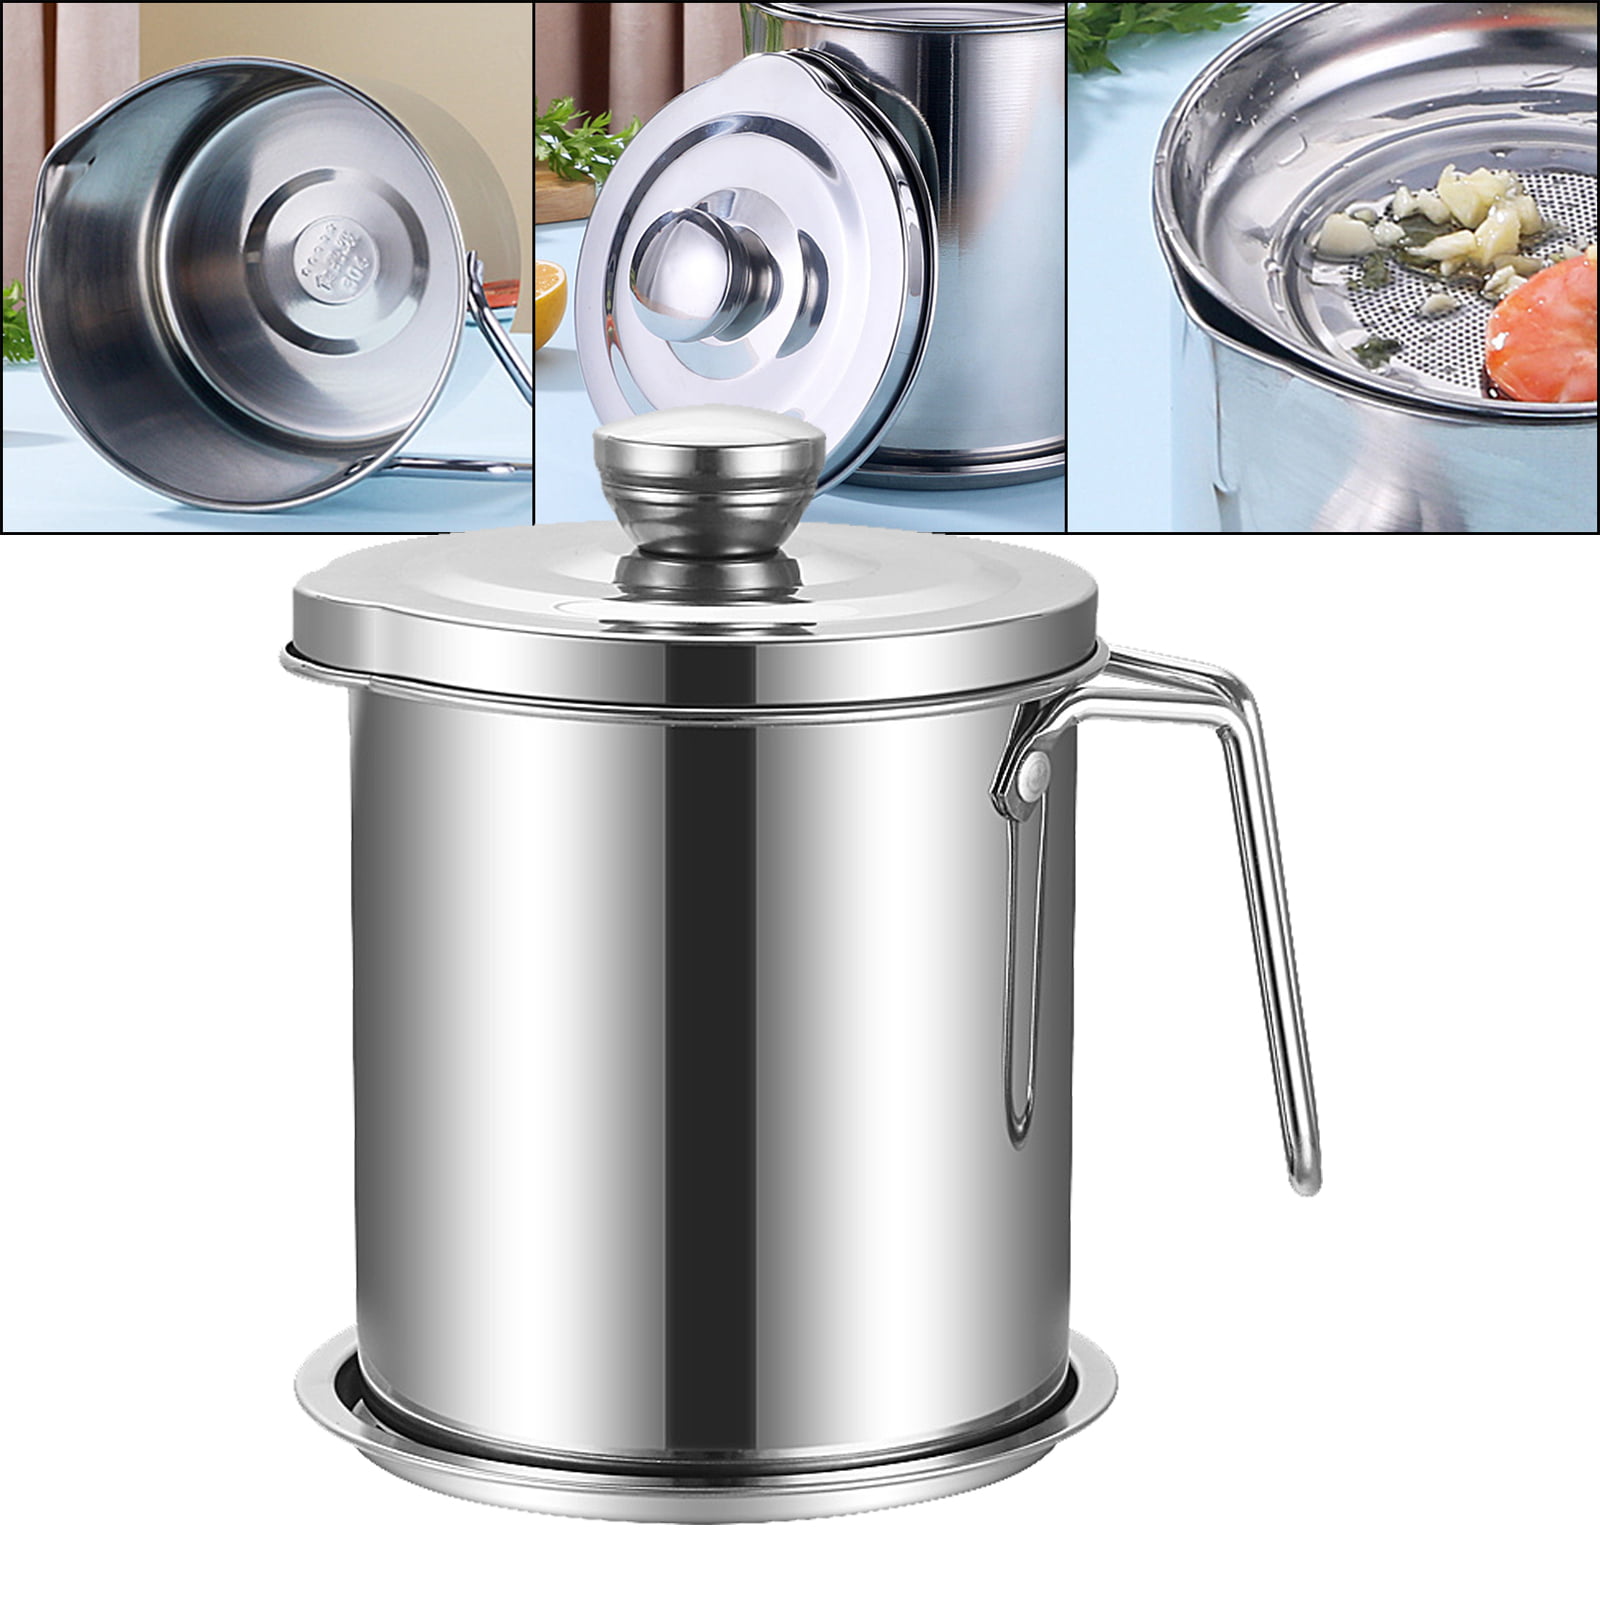 Stainless Steel Grease Container with Strainer, Bacon Grease Container, Bacon  Grease Saver with strainer, 304 Stainless Steel Oil Strainer Pot, Stainless  Steel Filter Oil Pot for Kitchen (48oz) - Yahoo Shopping